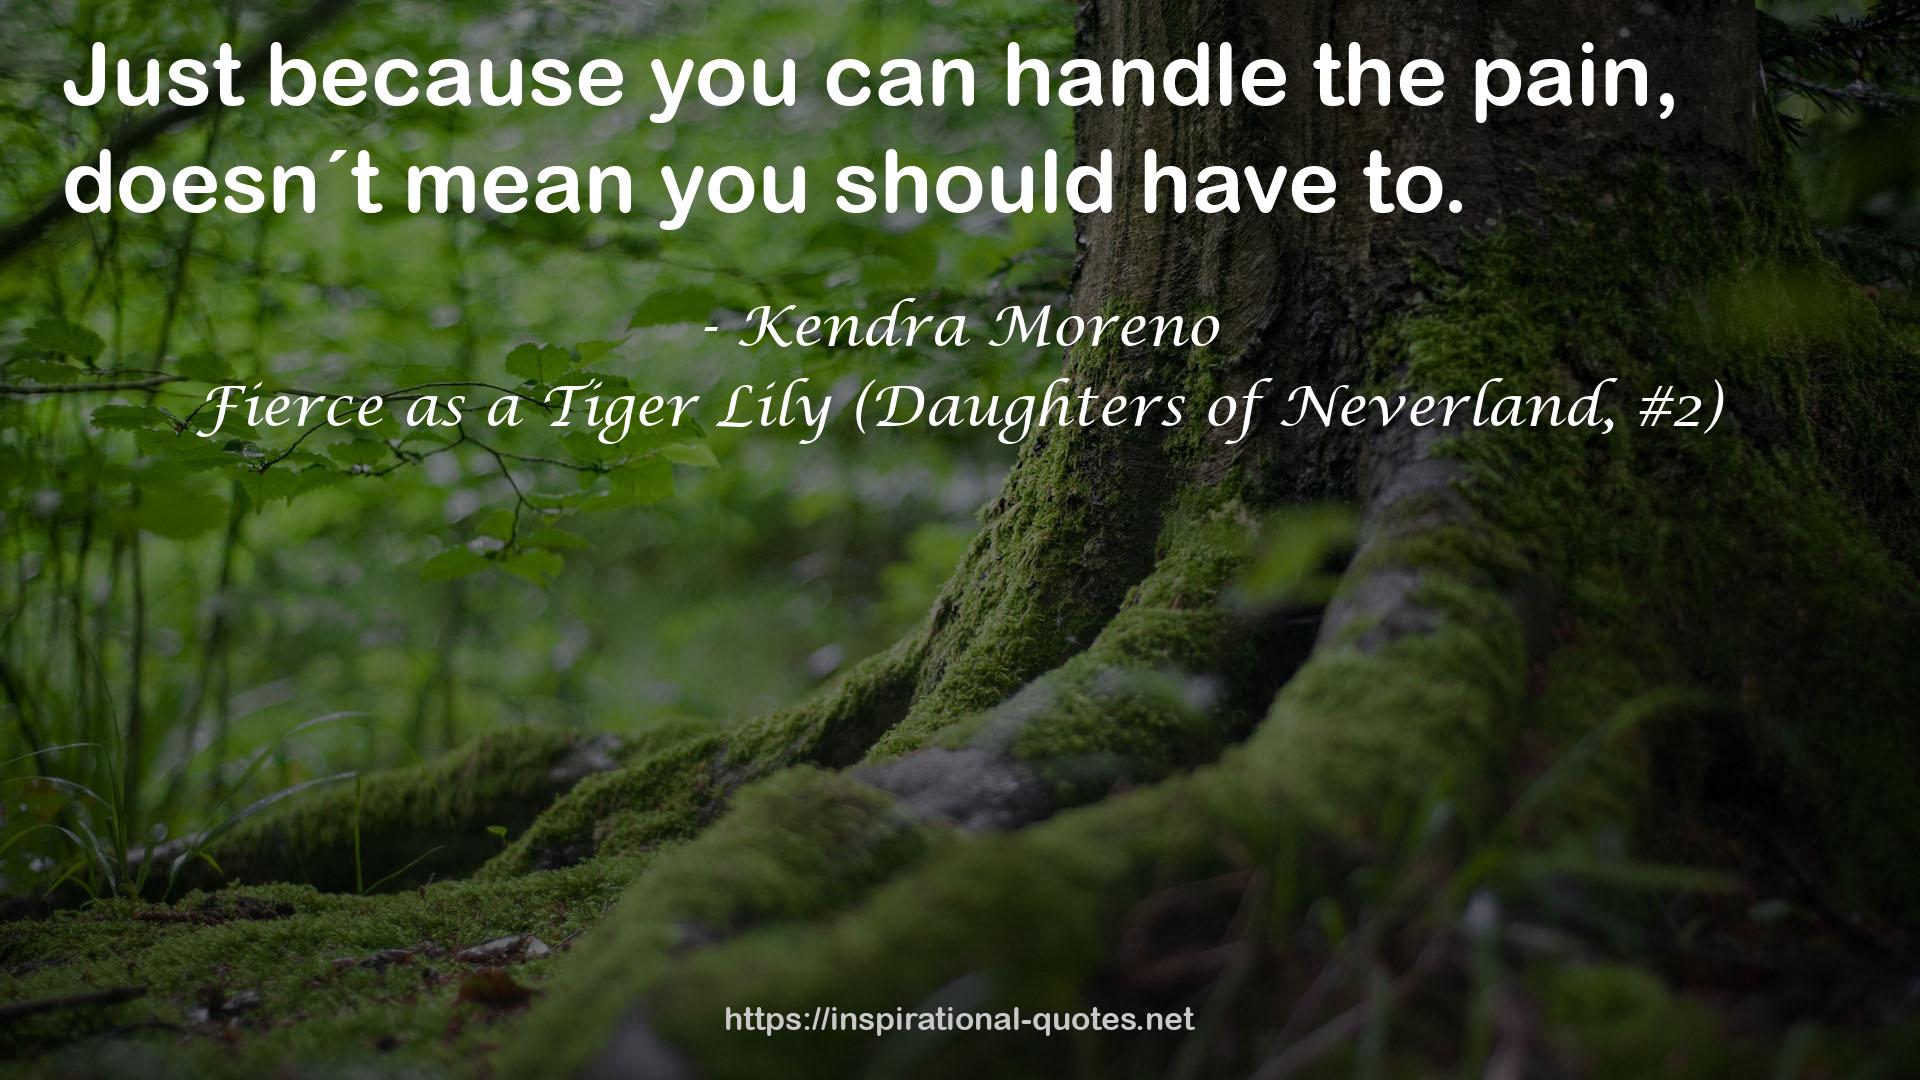 Fierce as a Tiger Lily (Daughters of Neverland, #2) QUOTES